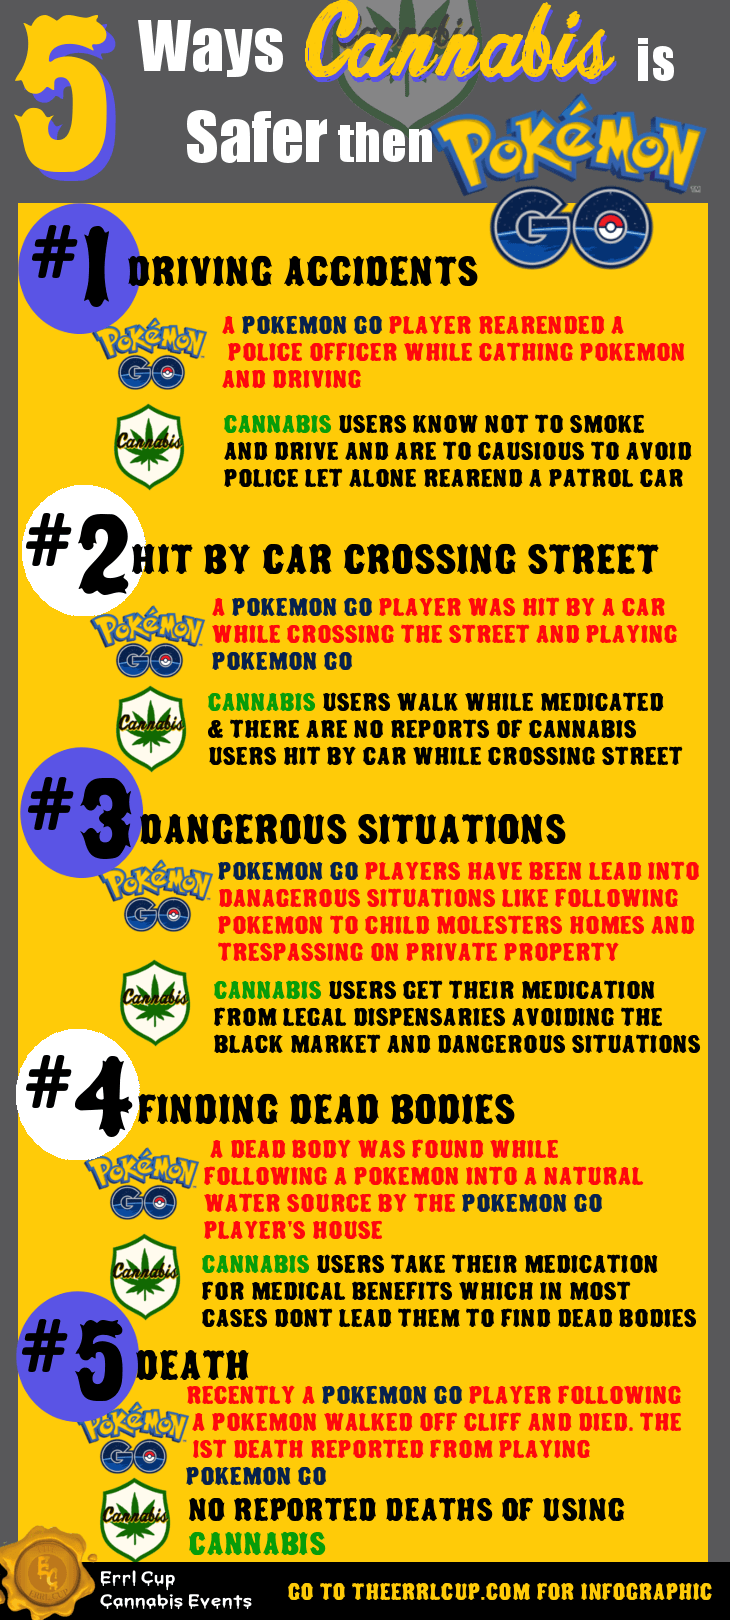 5 Way Cannabis is Safer then Pokemon GO